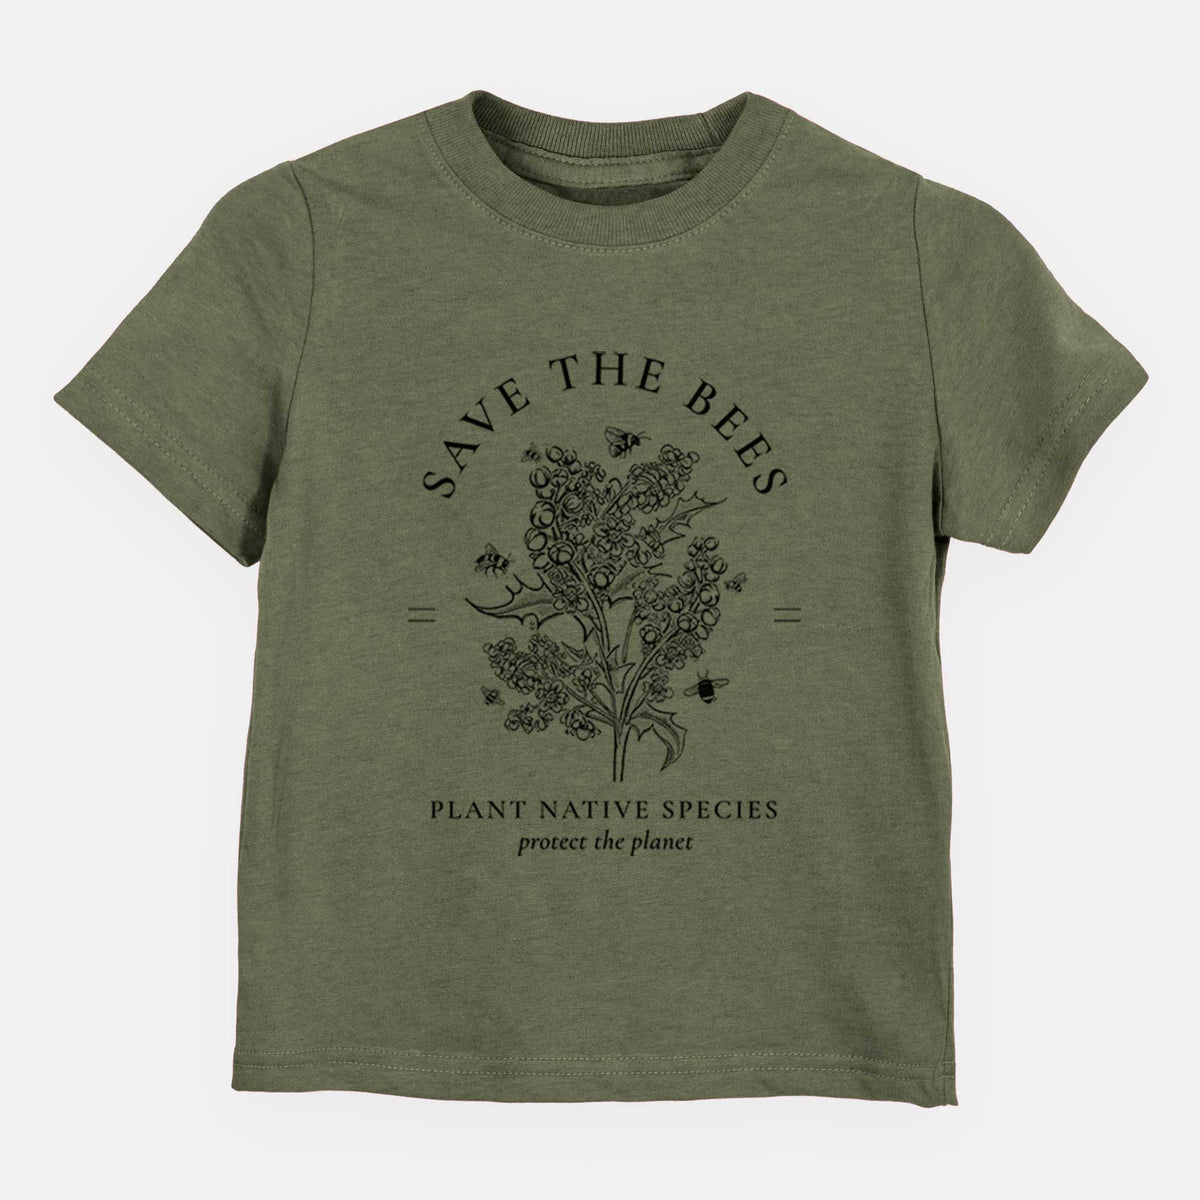 Save the Bees - Plant Native Species - Kids Shirt